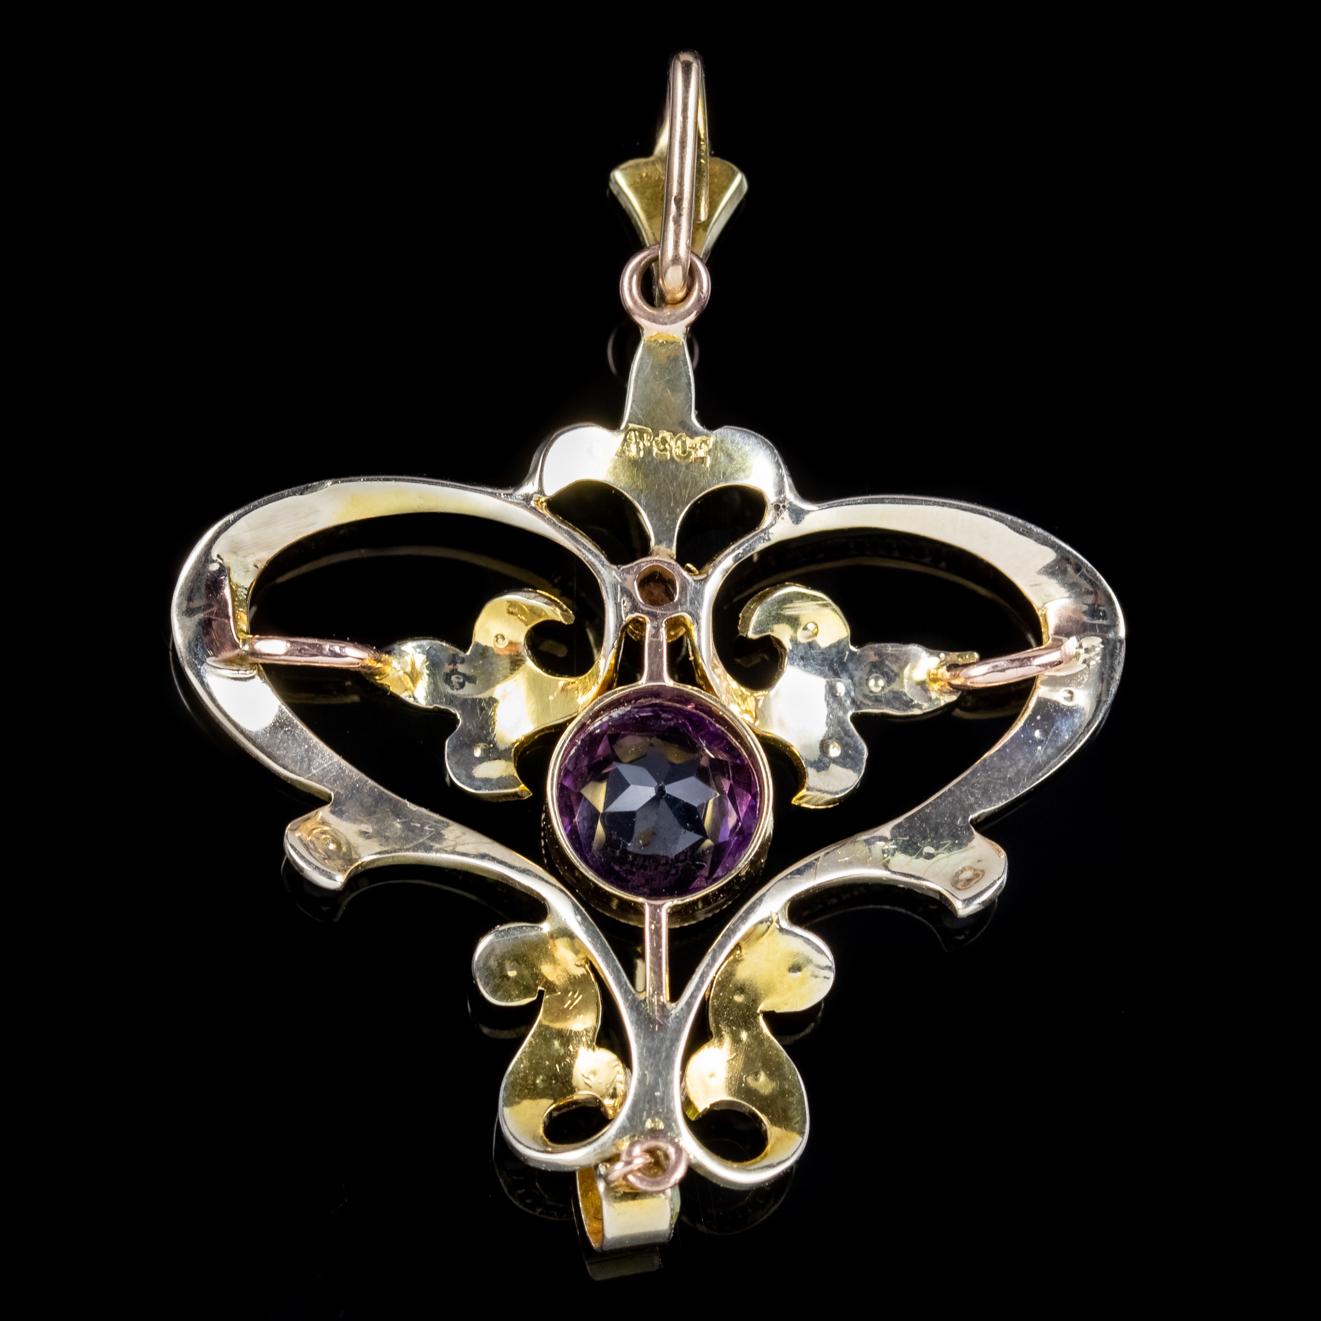 A fabulous antique Suffragette pendant from the Edwardian era decorated with Pearls and adorned with a 0.20ct Peridot dropper and a 1.80ct Amethyst in the centre. 

Suffragette jewellery was worn to show one’s allegiance to the women’s Suffragette